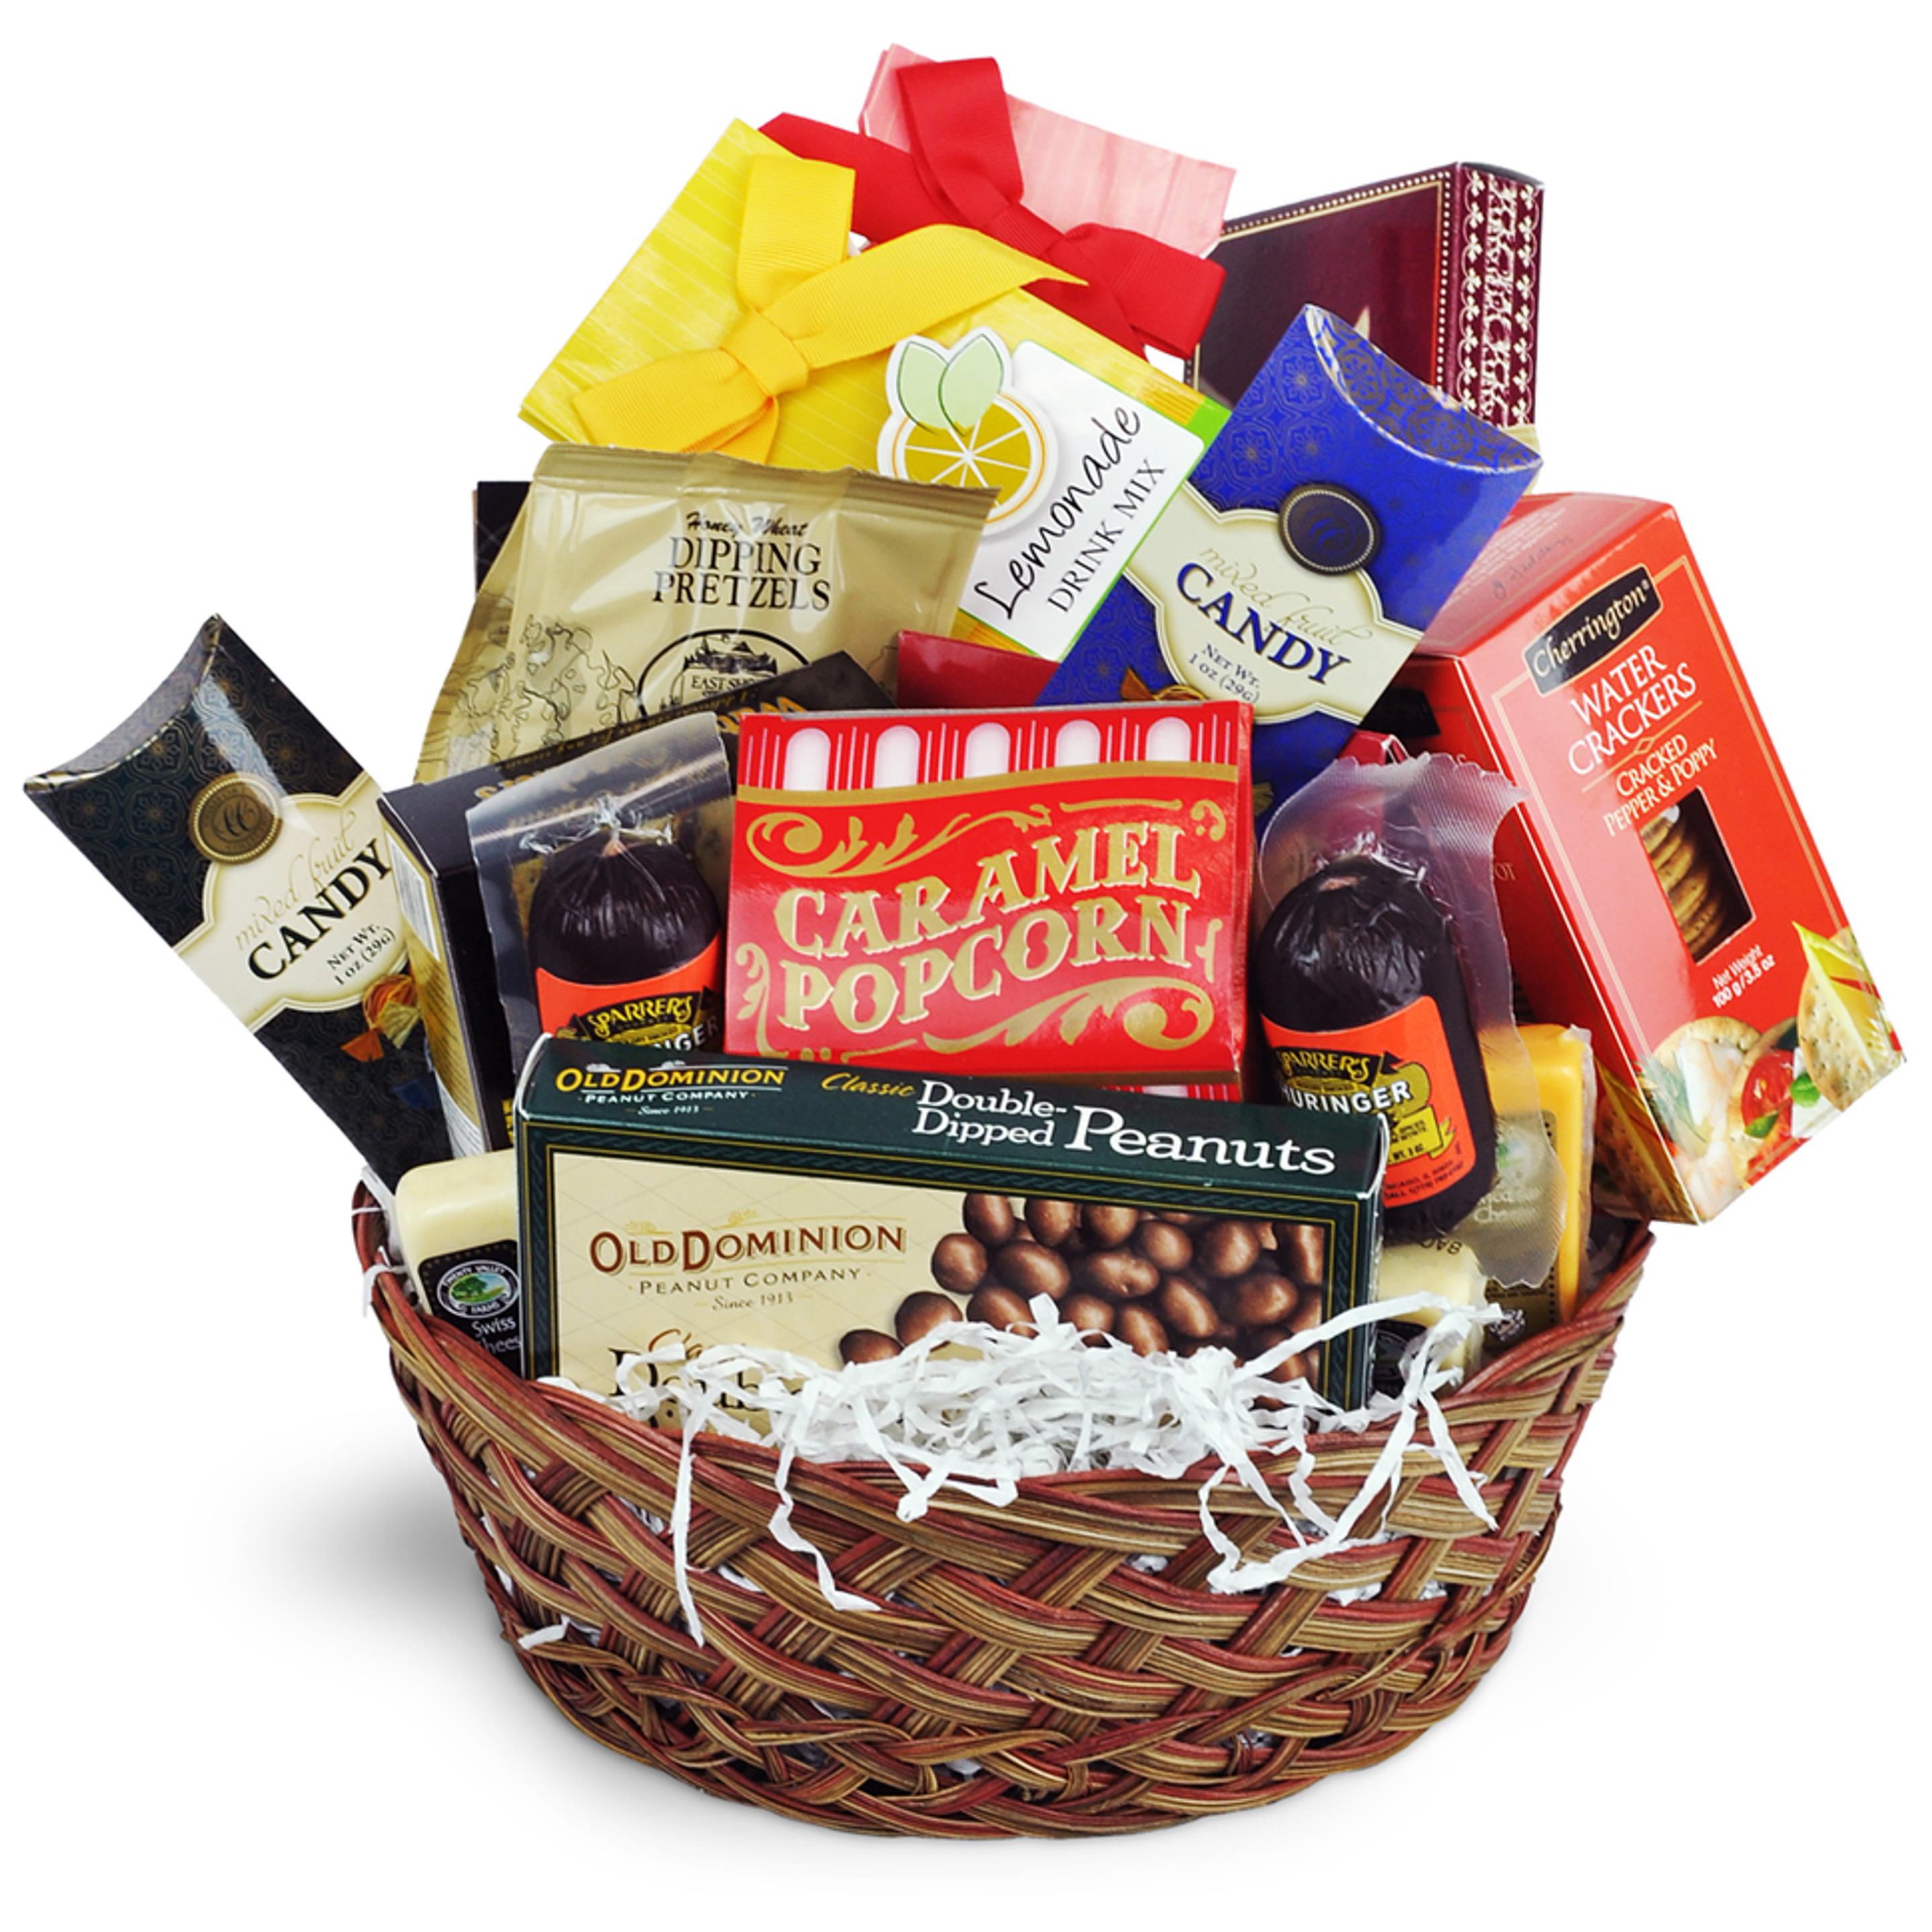 Birthday Basket goodies for him with snacks and treats like popcorn, peanuts and candy.